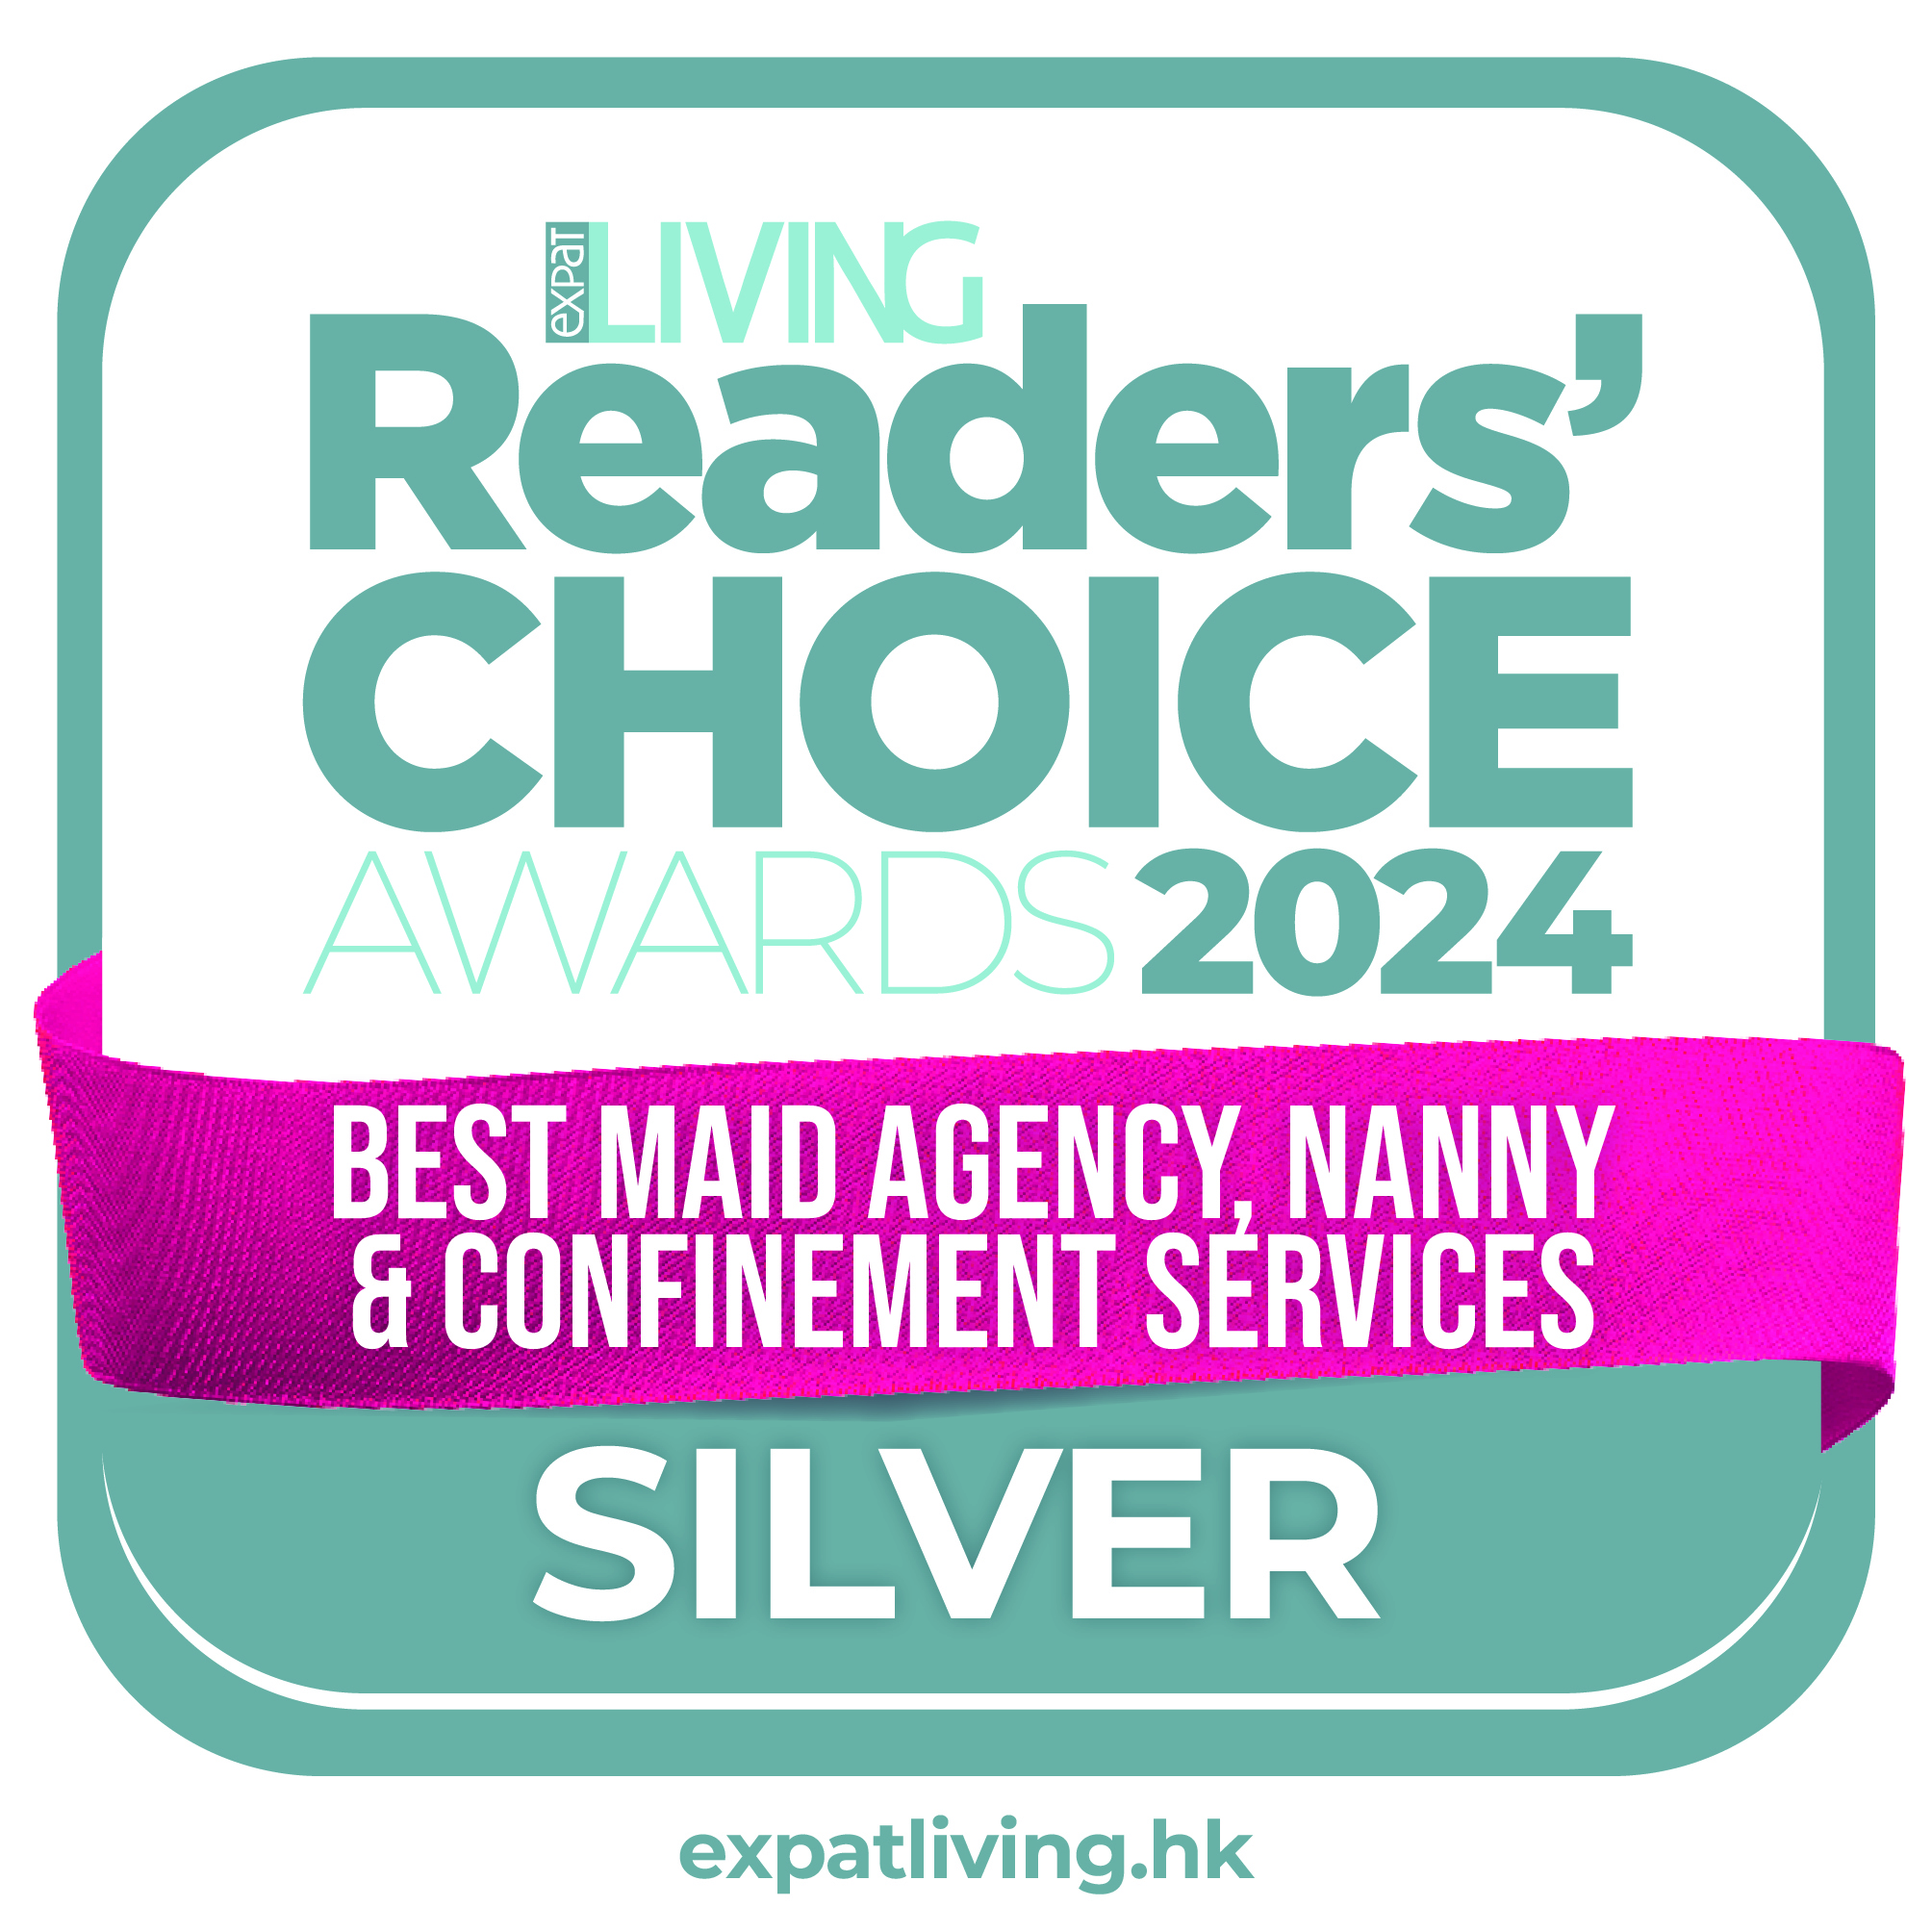 Silver winner of the Reader's Choice Awards 2024 for Best Maid, Nanny & Confinement Services